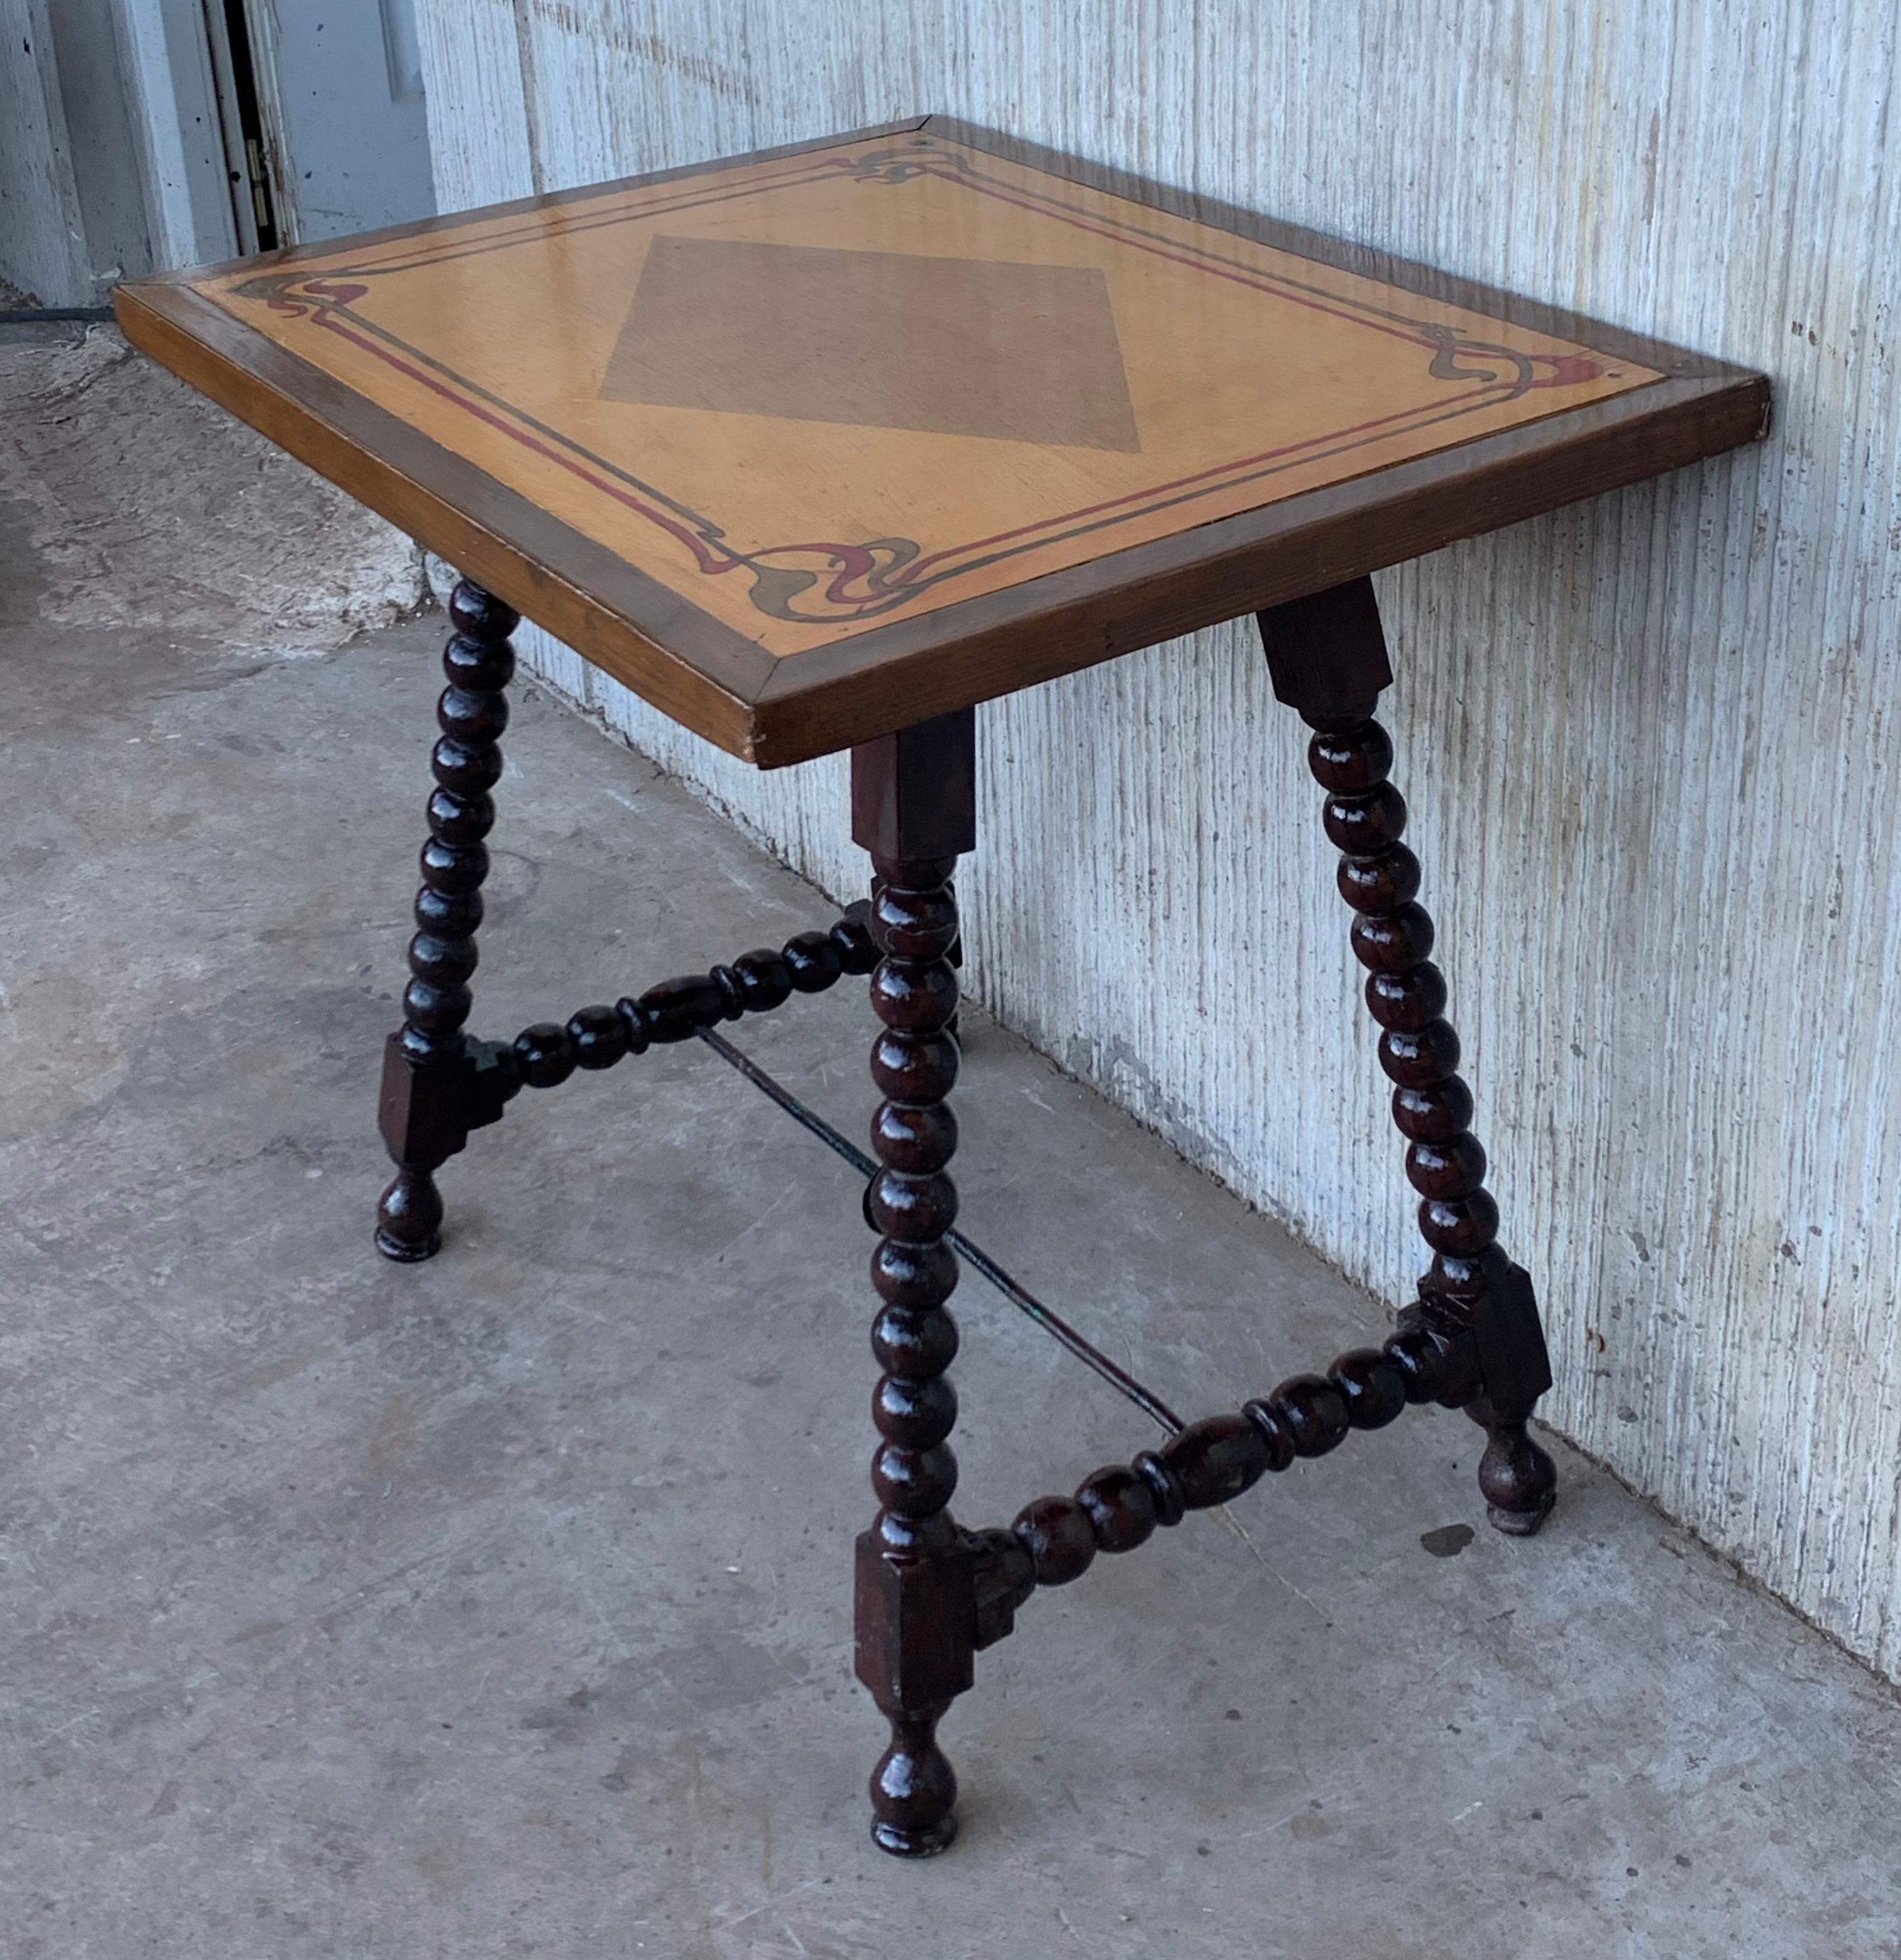 19th century Baroque Spanish side table with marquetry & painted top

19th century Spanish trestle table in walnut. This piece has a great scale, lovely turned legs and beautiful marquetry top. . This table could be used as an end table,